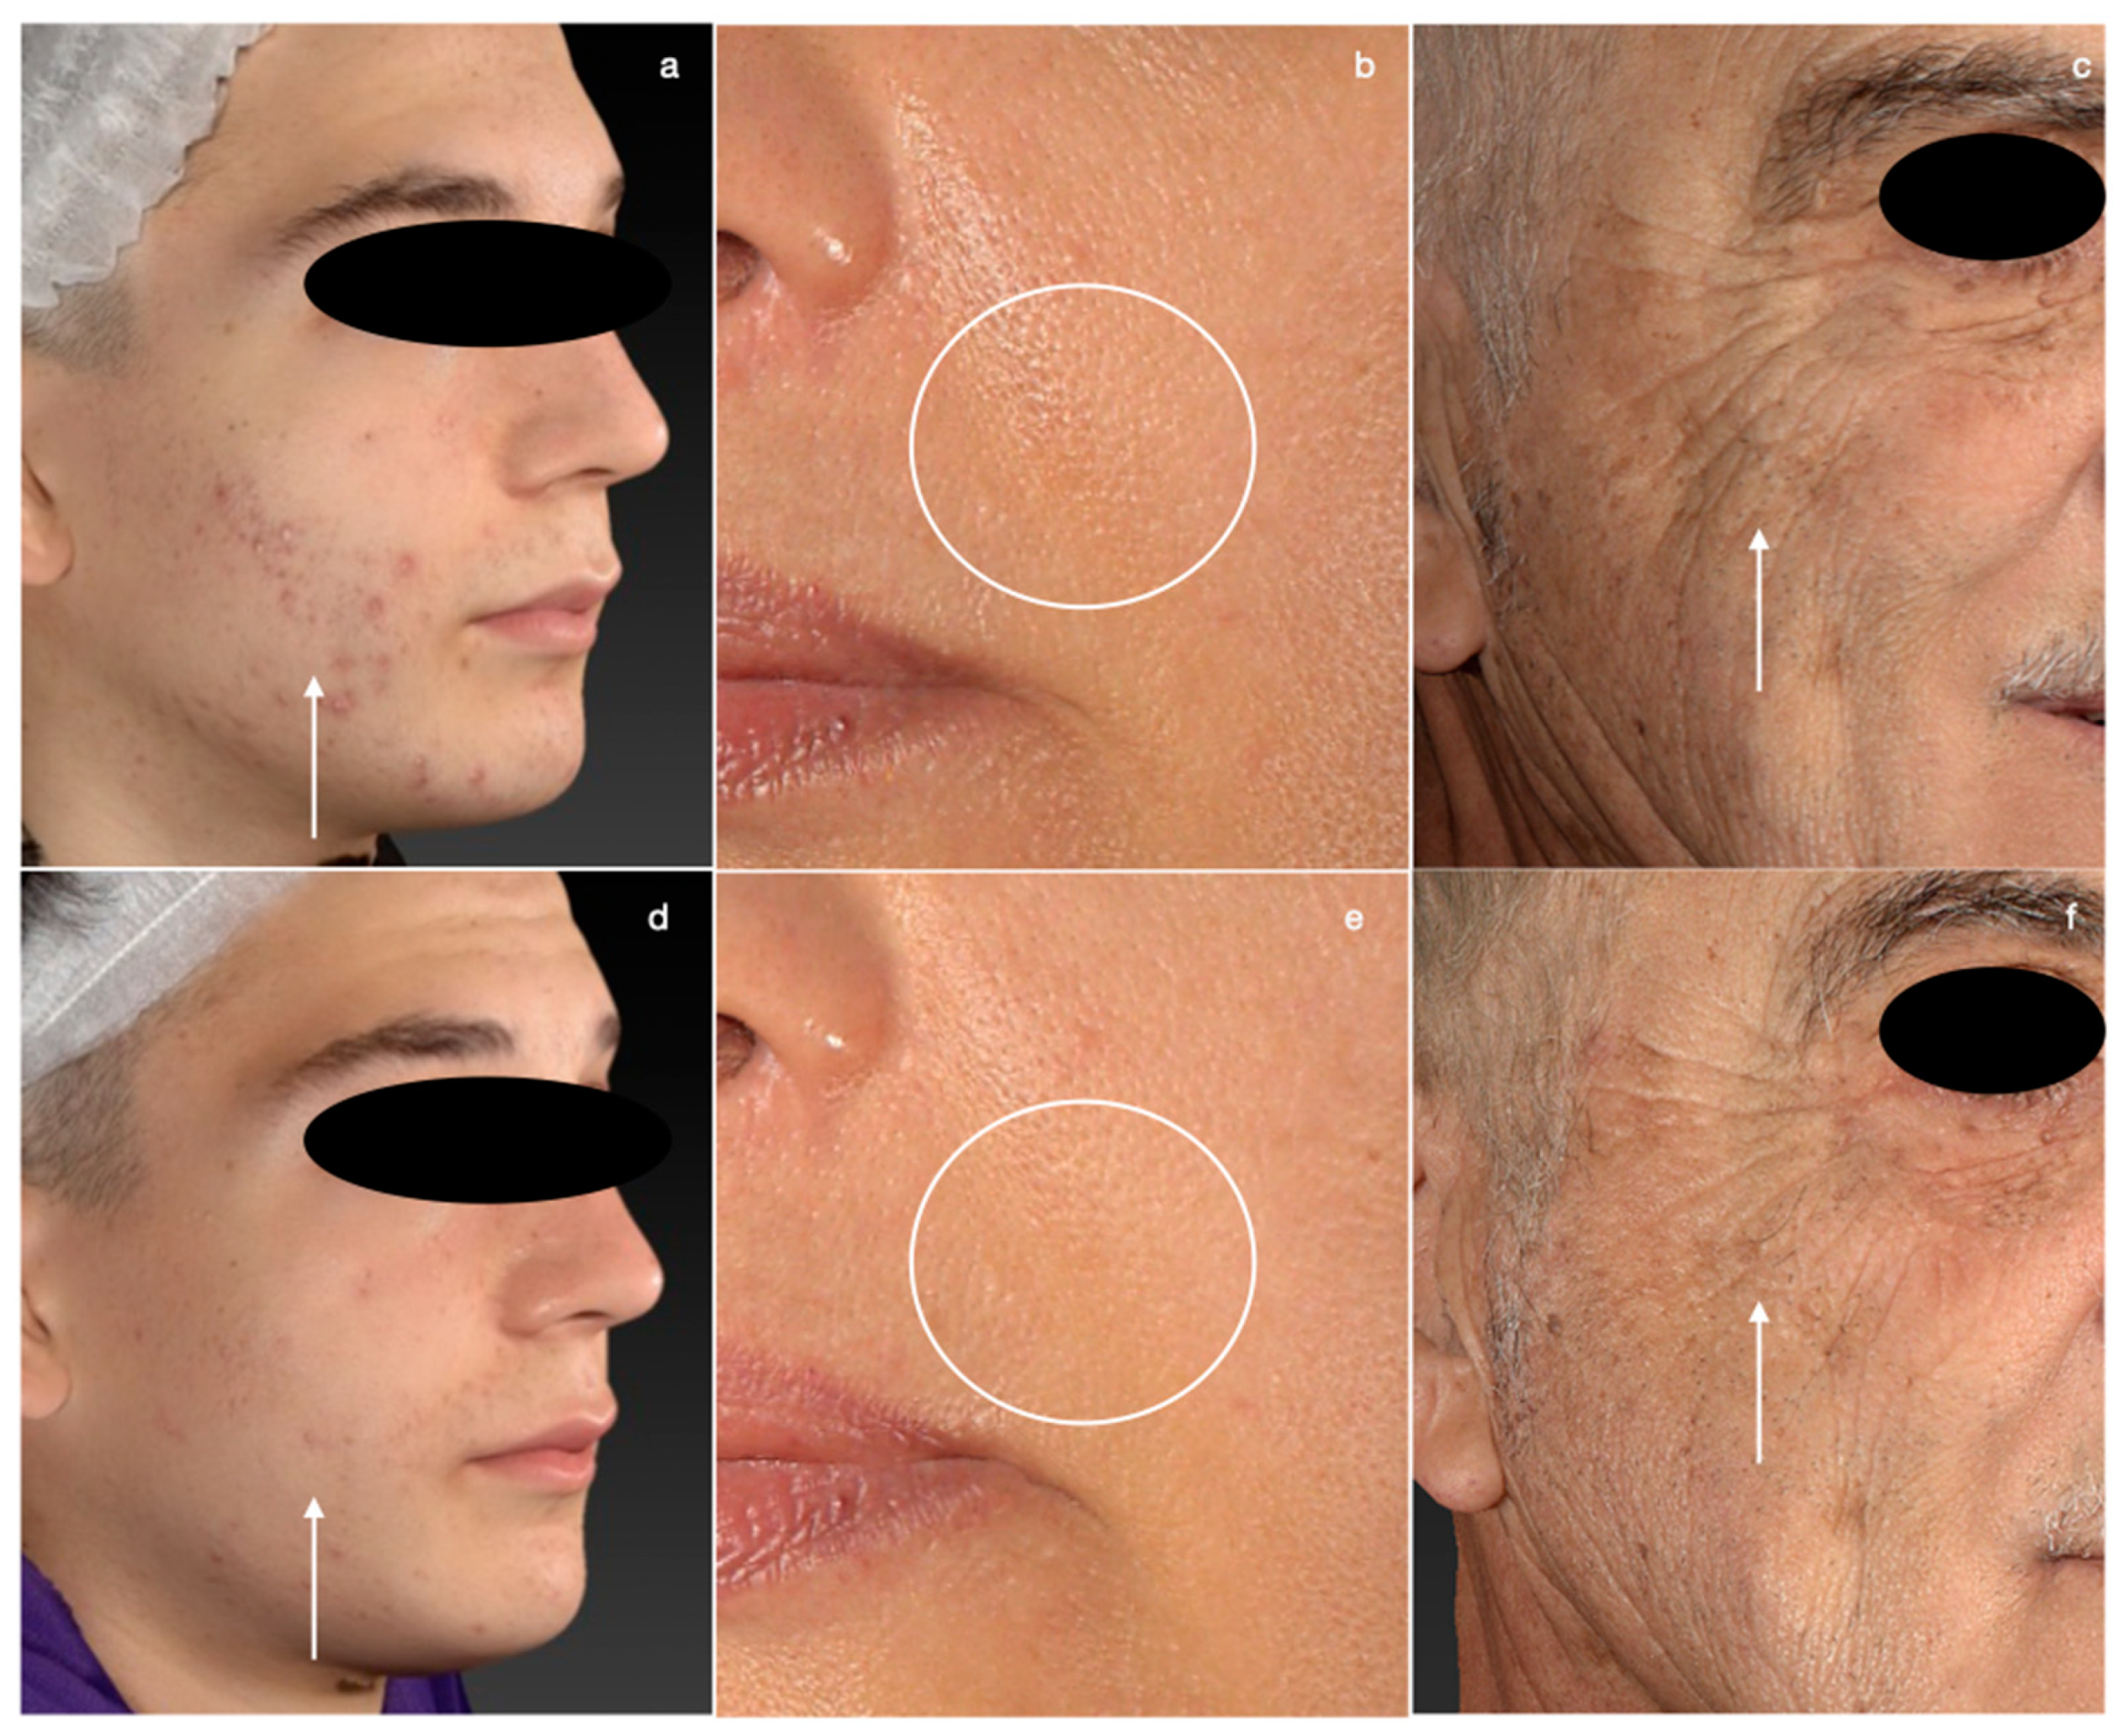 Medicina | Free Full-Text | Carbon Peeling Laser Treatment to Improve Skin  Texture, Pores and Acne Lesions: A Retrospective Study